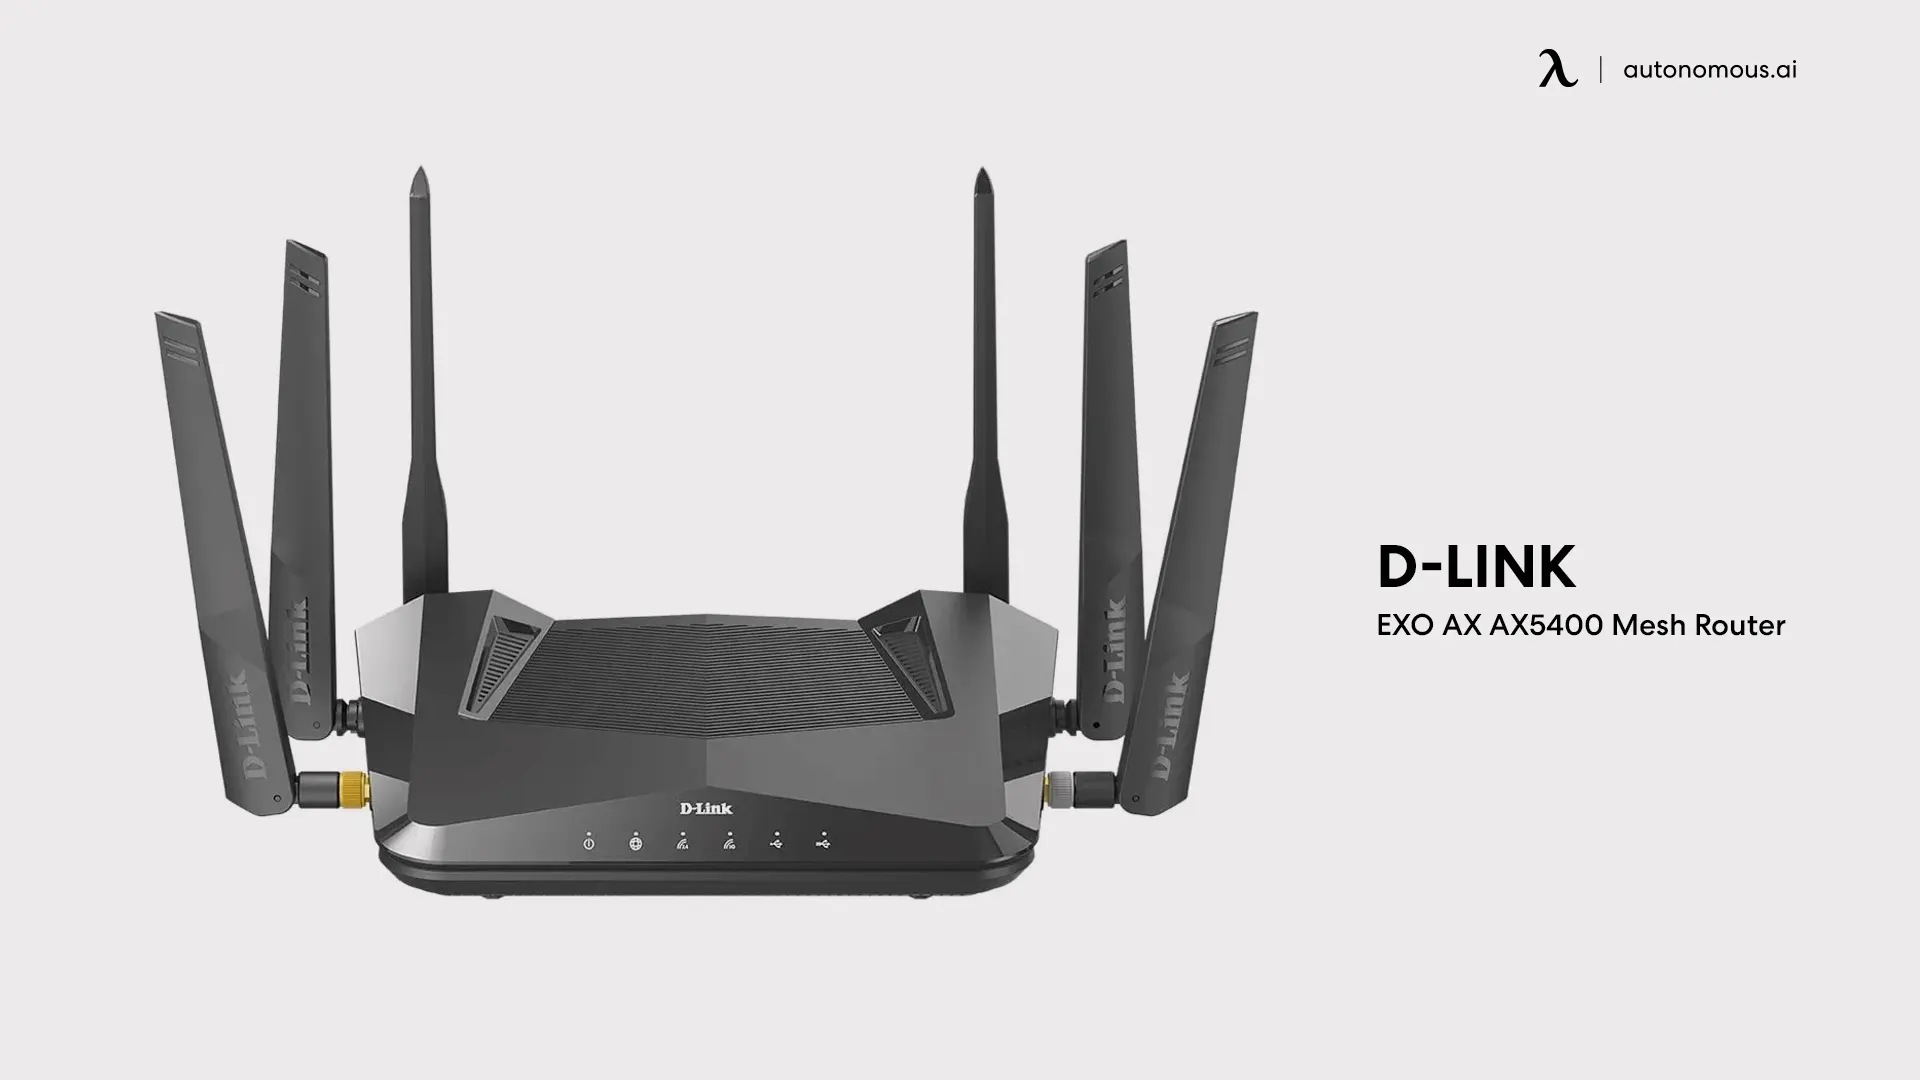 D-Link EXO AX AX5400 security router